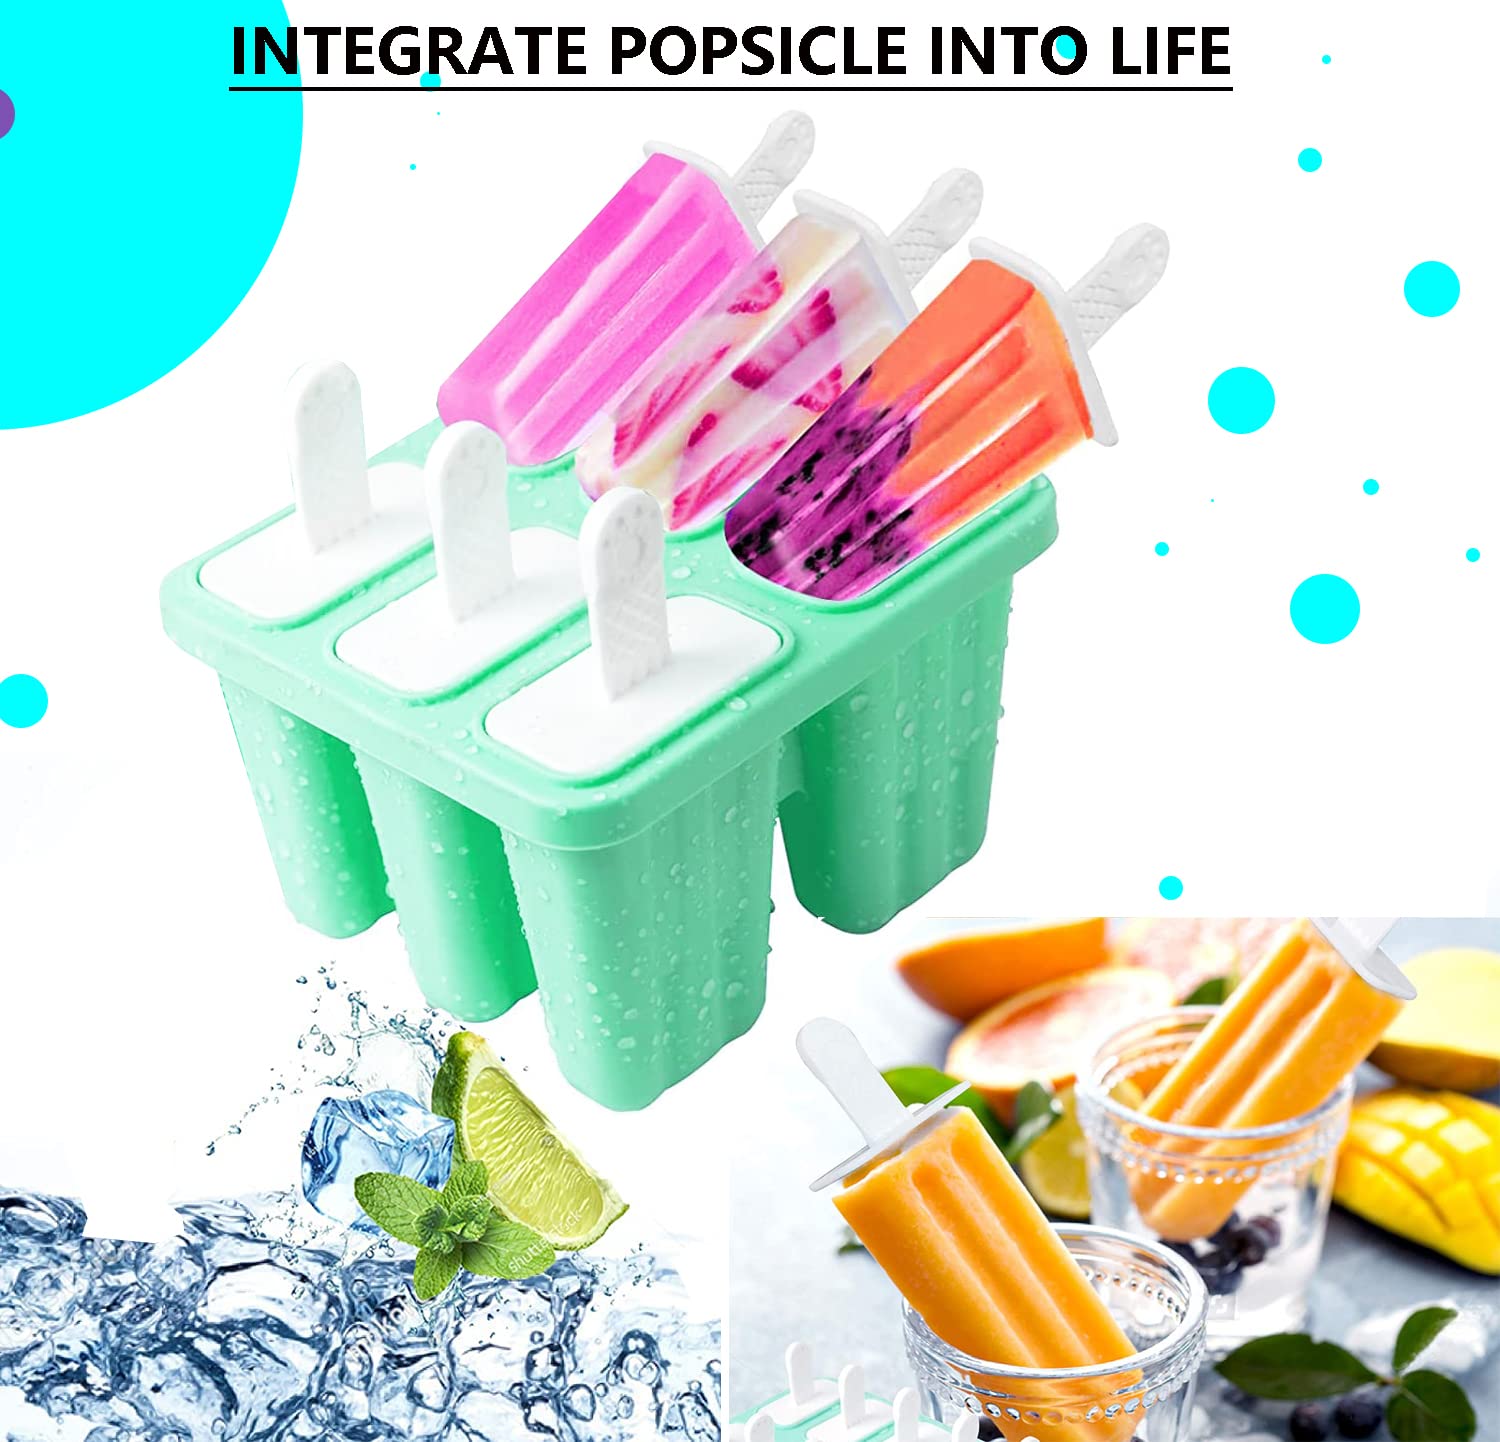 Silicone Popsicle Molds, 6 Pieces Ice Pop Molds, BPA Free Popsicle Mold Reusable Easy Release Ice Pop Maker, Popsicle Mould with Cleaning Brush and Silicone Funnel, Popsicle Molds green